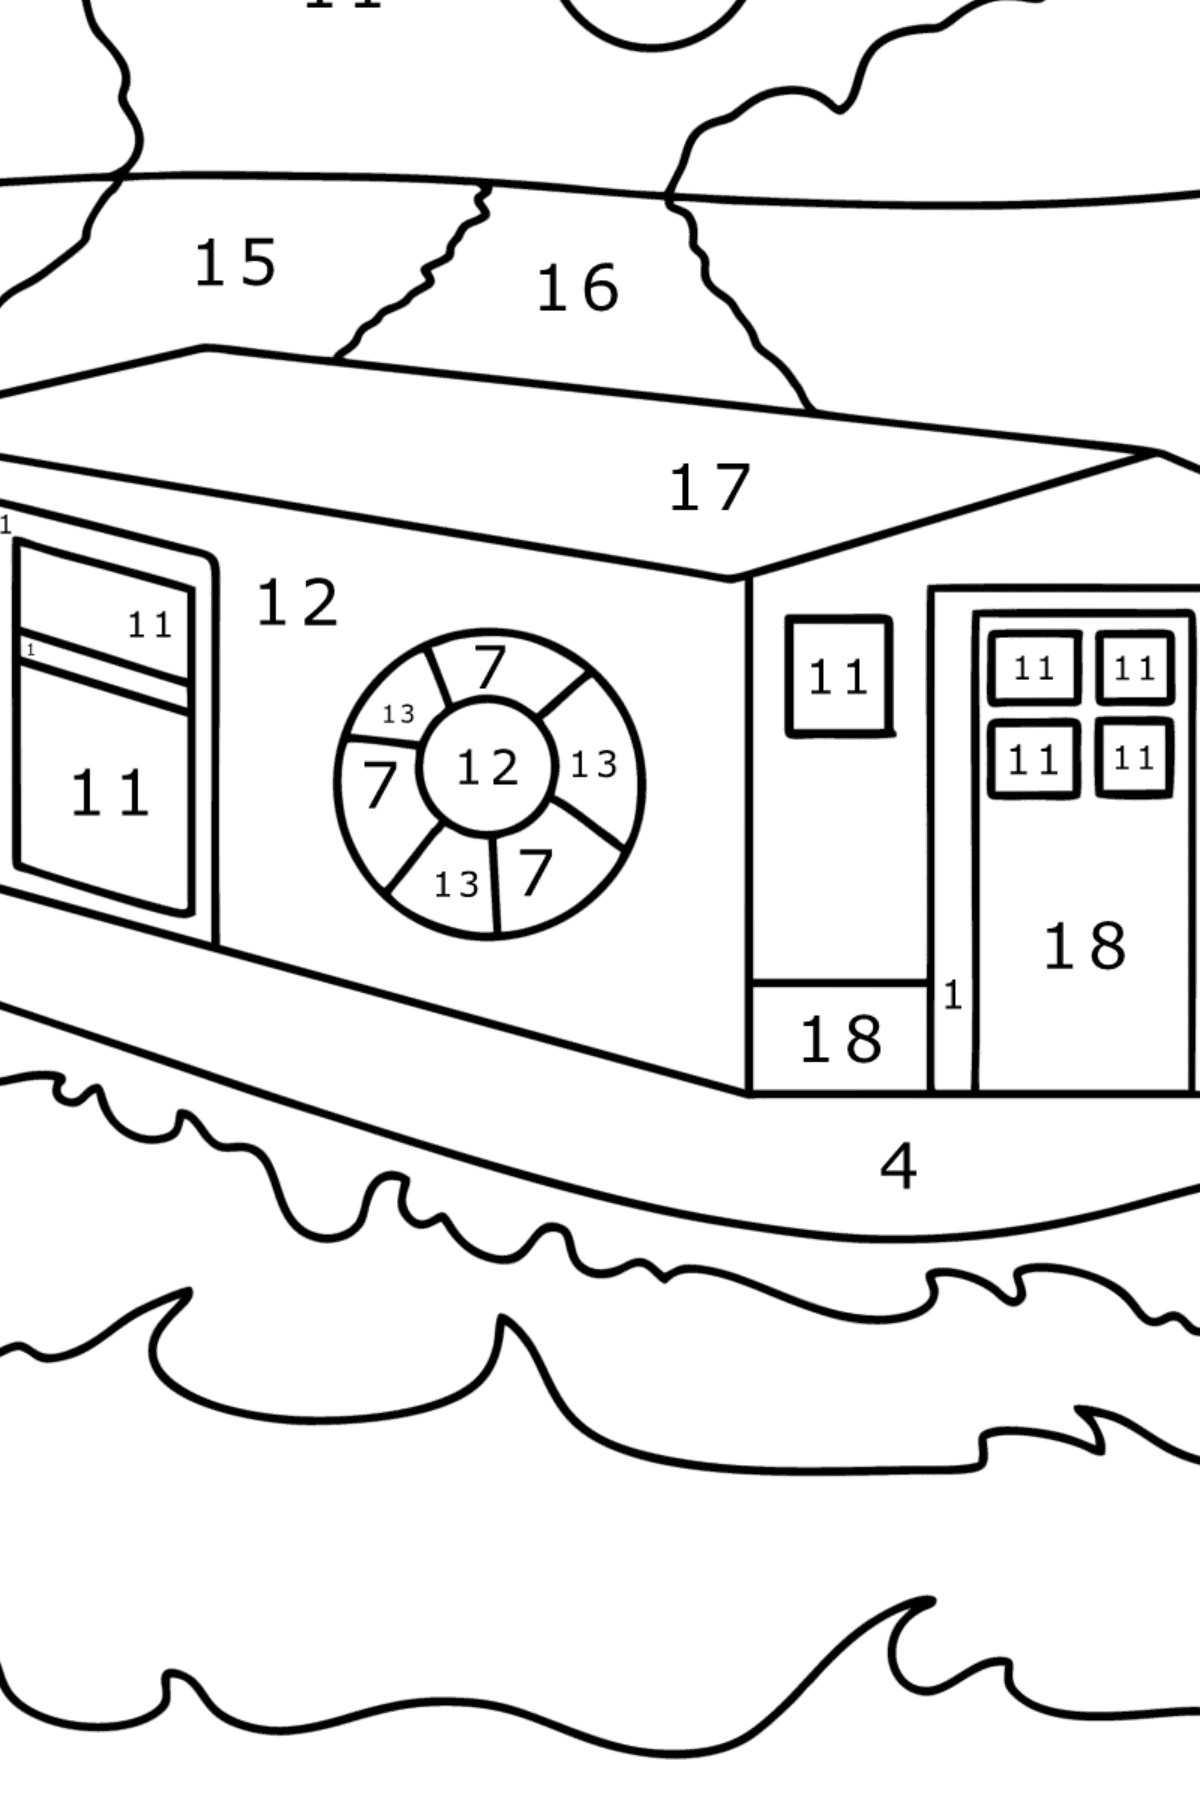 BoatHouse coloring page - Coloring by Numbers for Kids